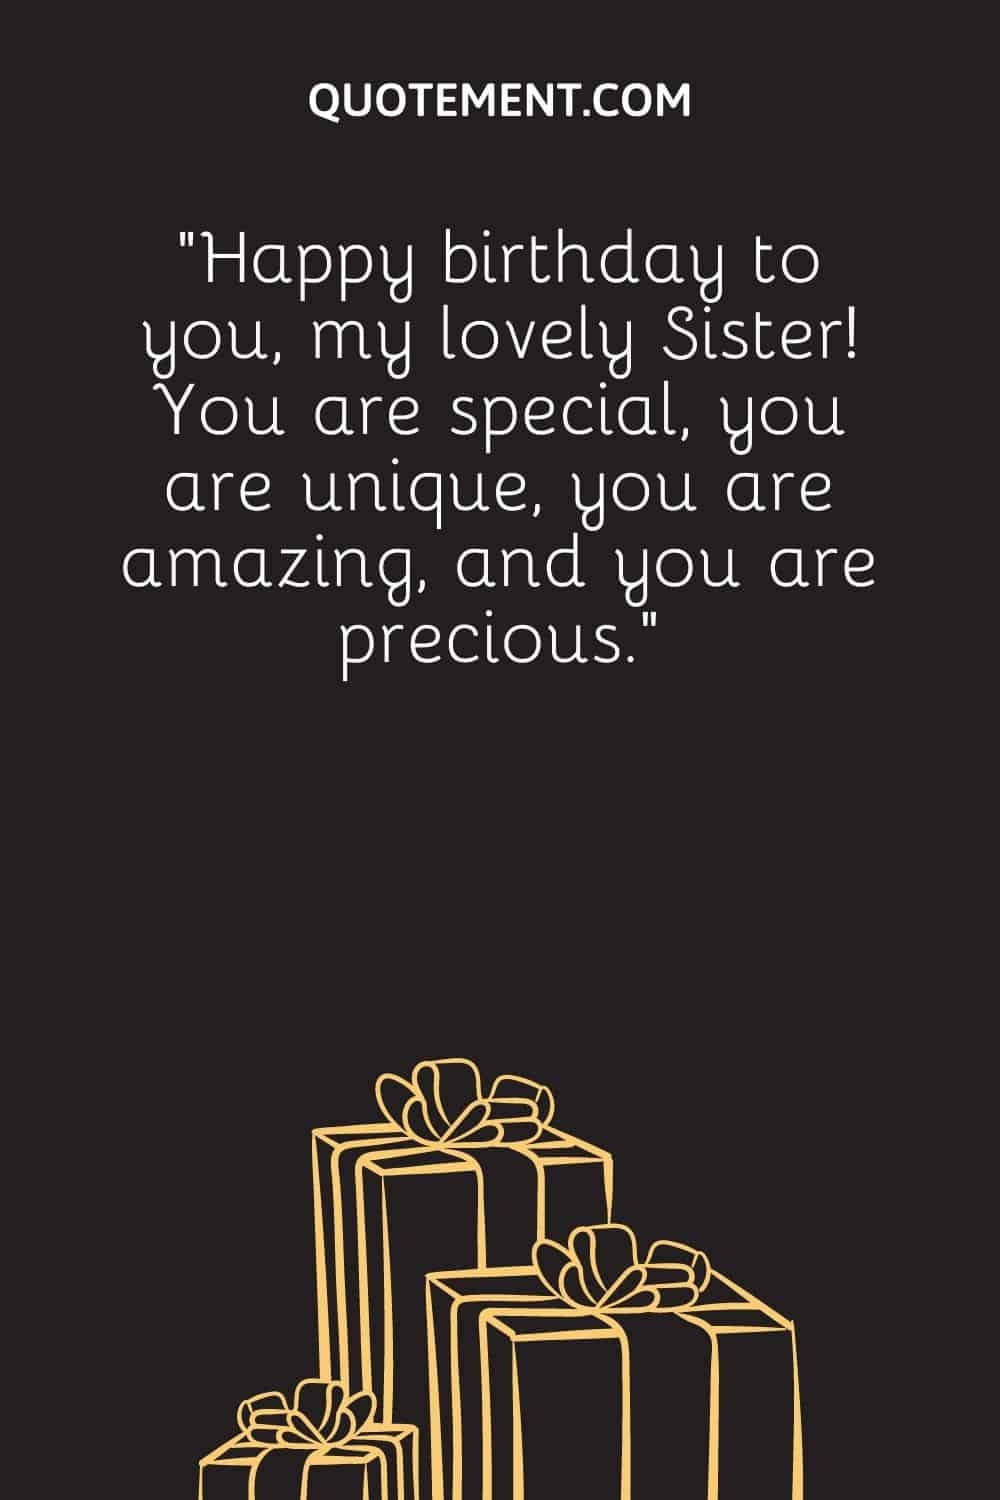 “Happy birthday to you, my lovely Sister! You are special, you are unique, you are amazing, and you are precious.”